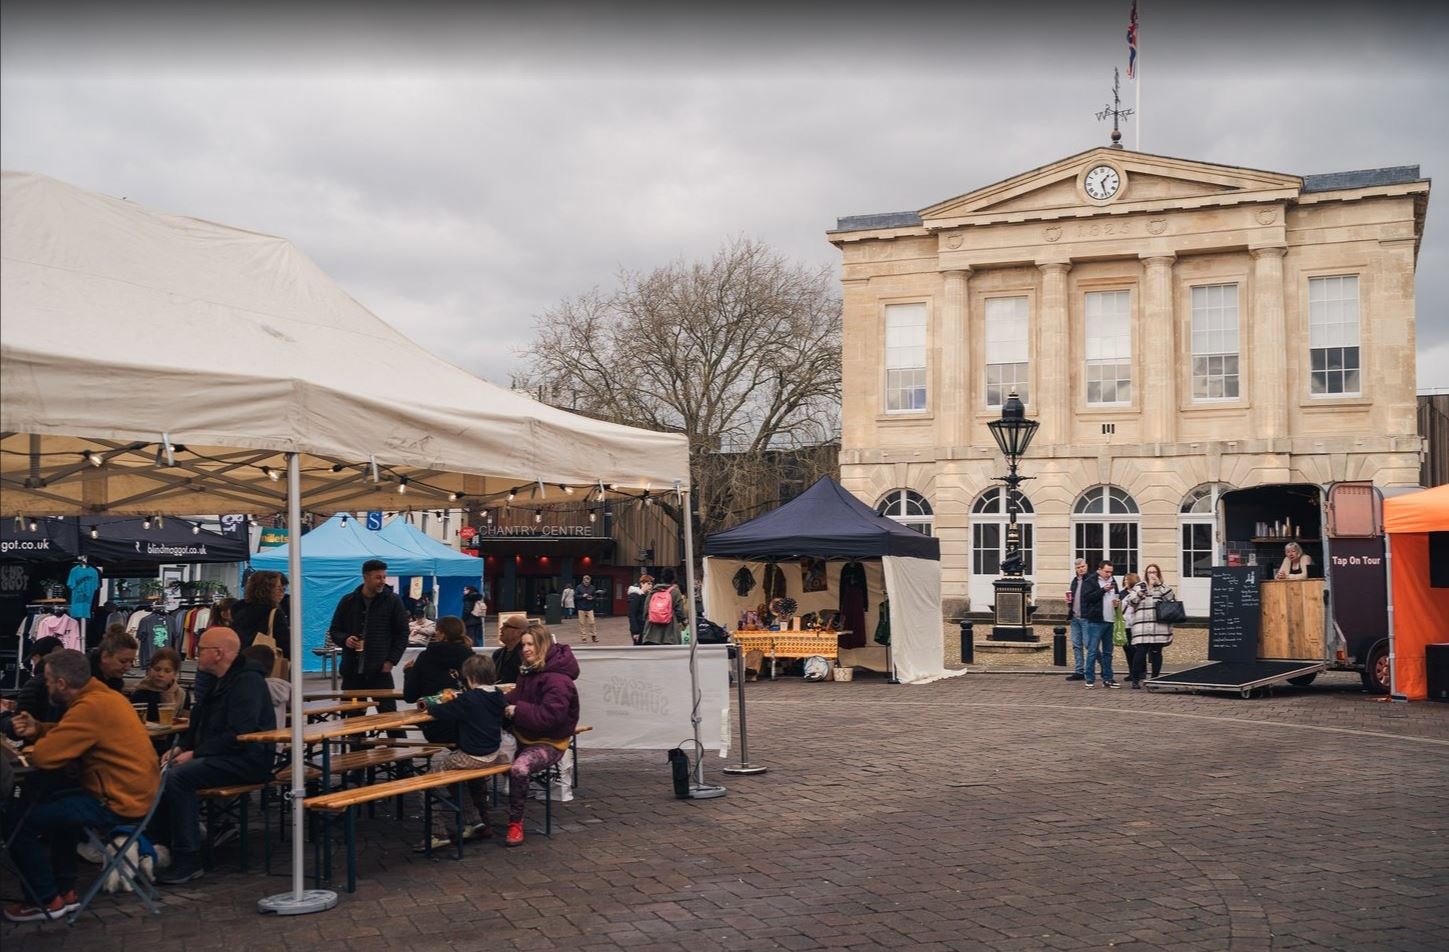 On the second Sunday of the month you'll find our eclectic market open at the top of Andover High Street 📍. 

Our covered seating area is right in front of the Guildhall, surrounded by stalls which lead up to the entrance to the Chantry Centre. 

Pa